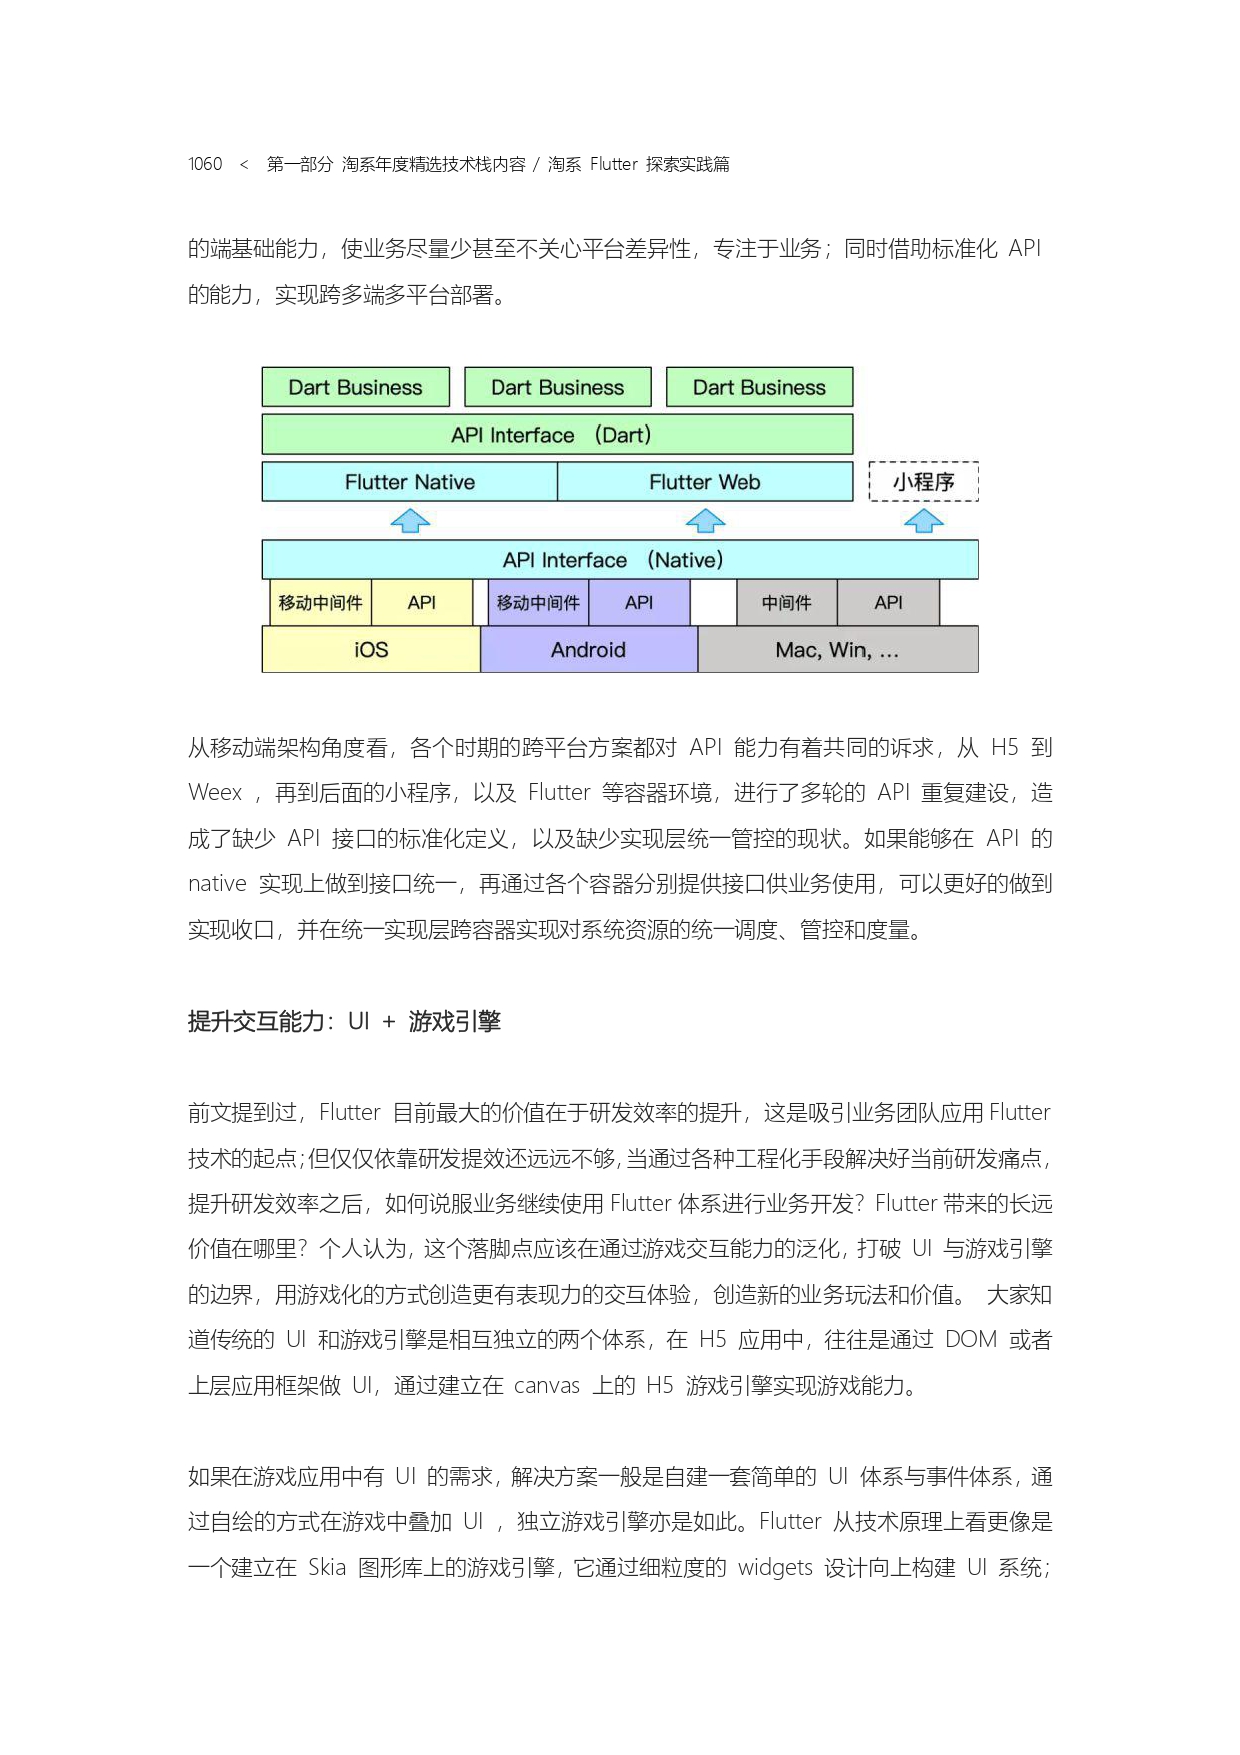 The Complete Works of Tao Technology 2020-571-1189-301-619_page-0190.jpg